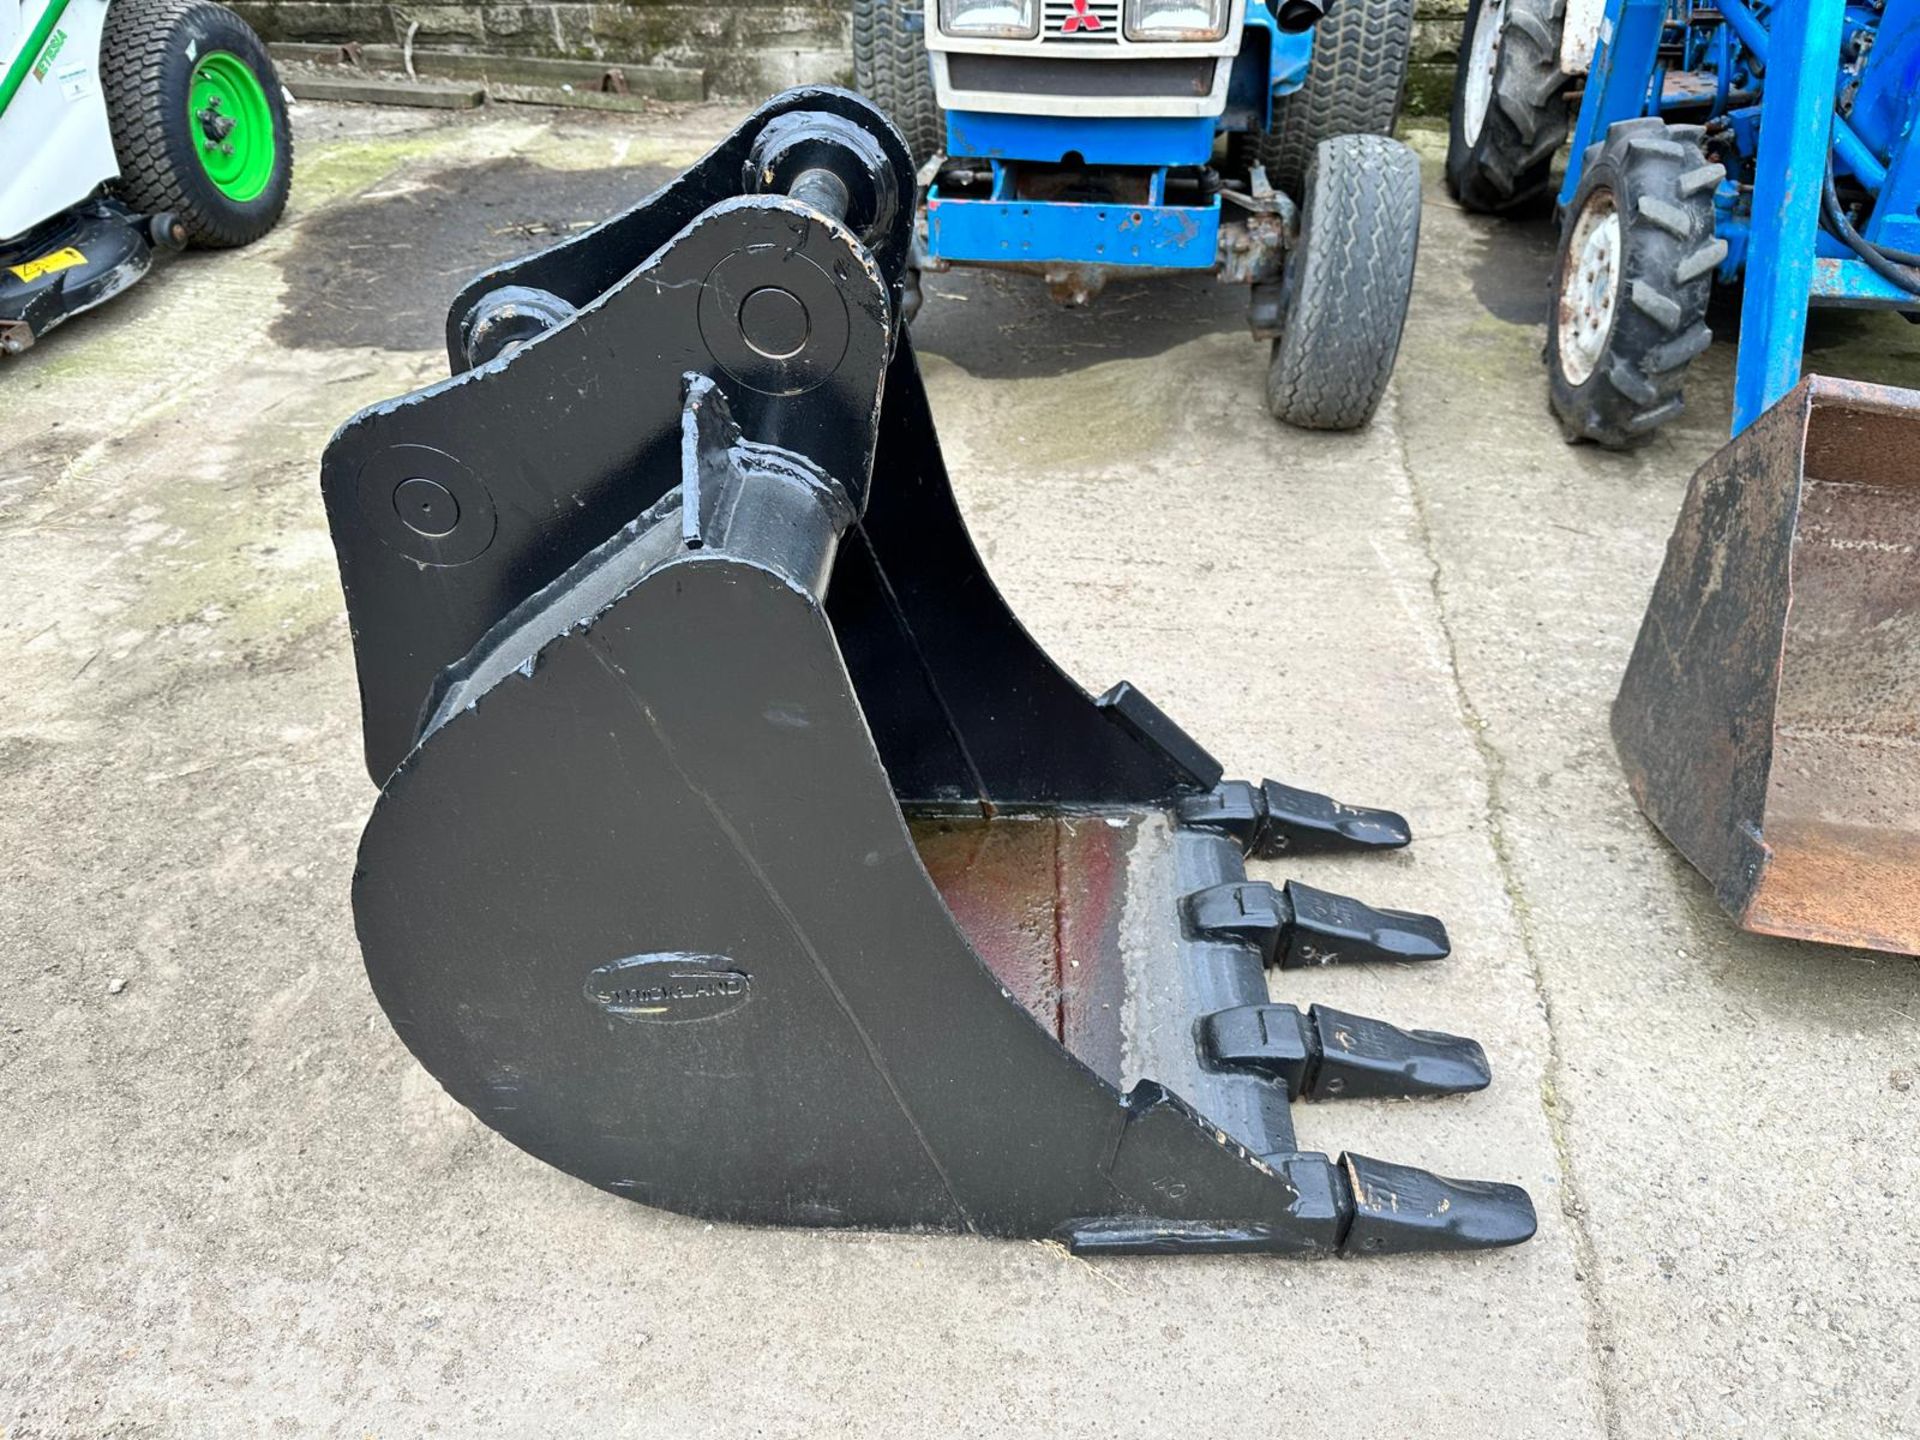 Strickland 24” Digging Bucket With Teeth, Came Of Bobcat E80, Brand New Teeth *PLUS VAT* - Image 4 of 9